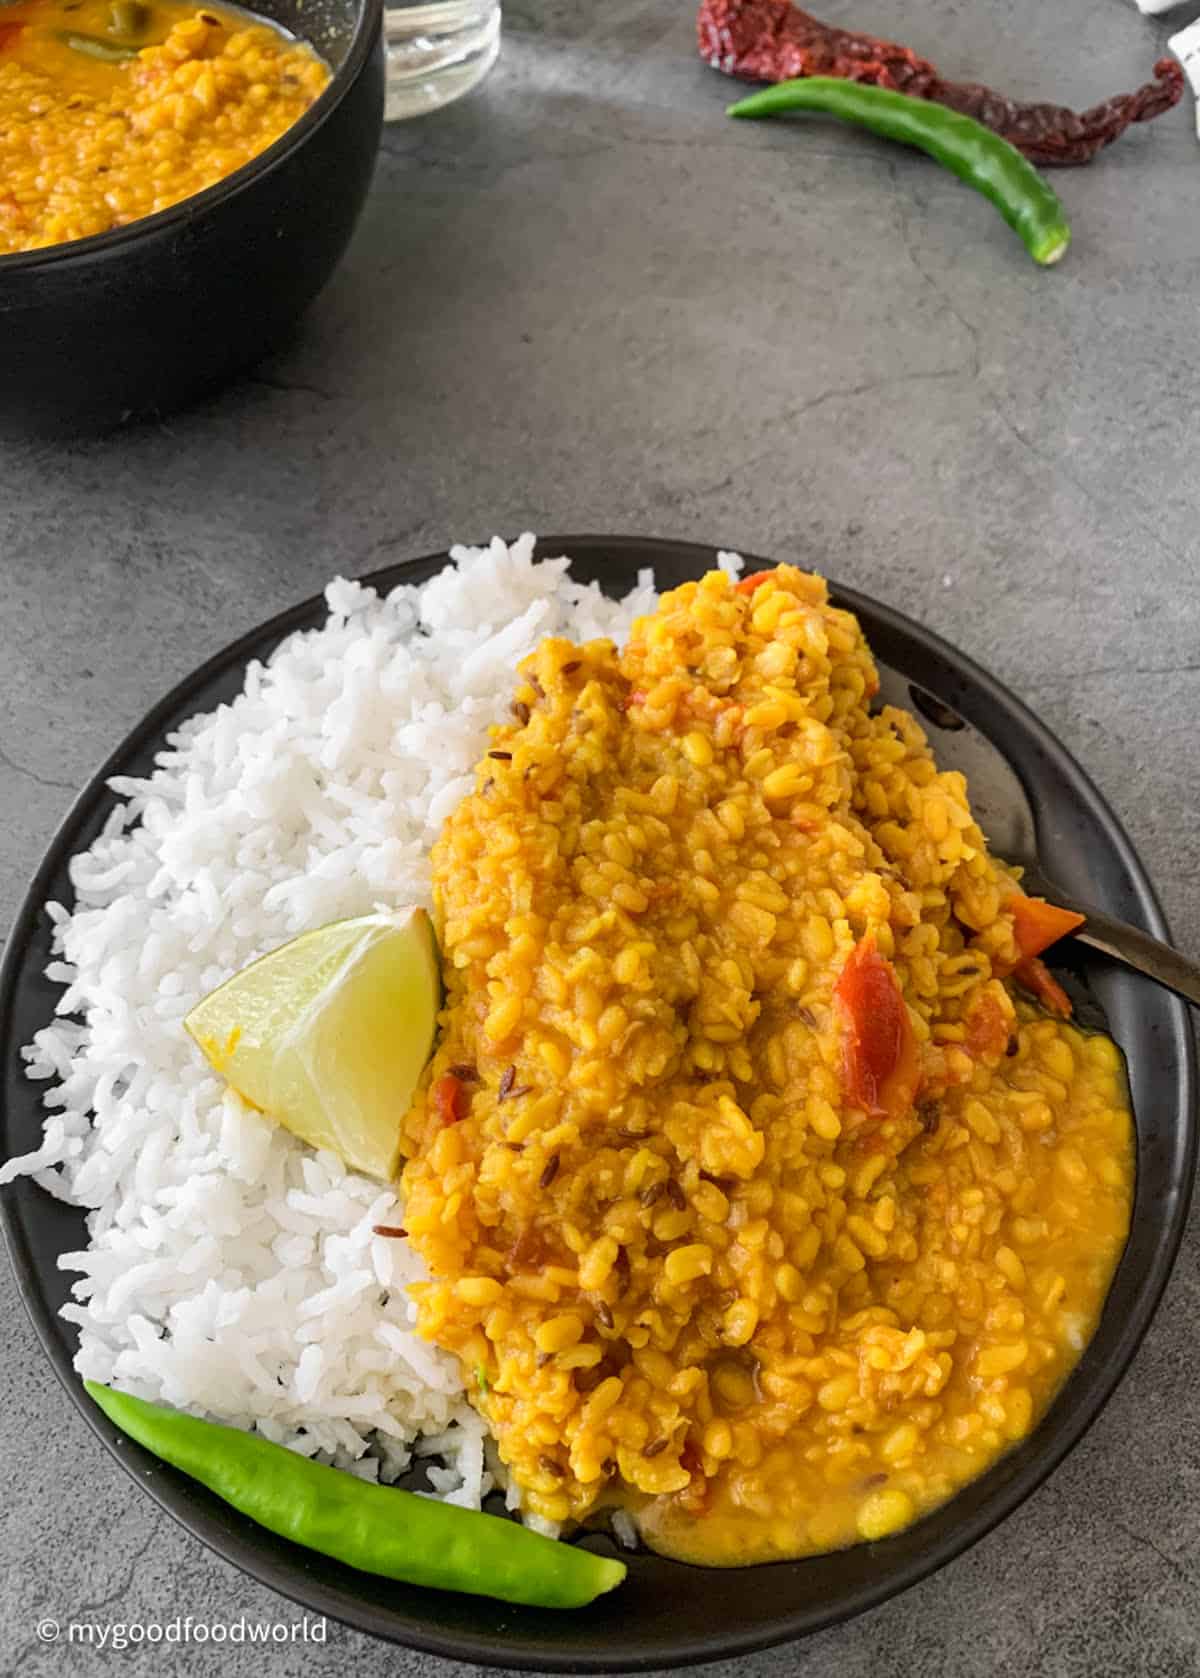 Bengali moong dal is served in a black plate with some cooked white rice, a chili pepper, and a piece of lime.